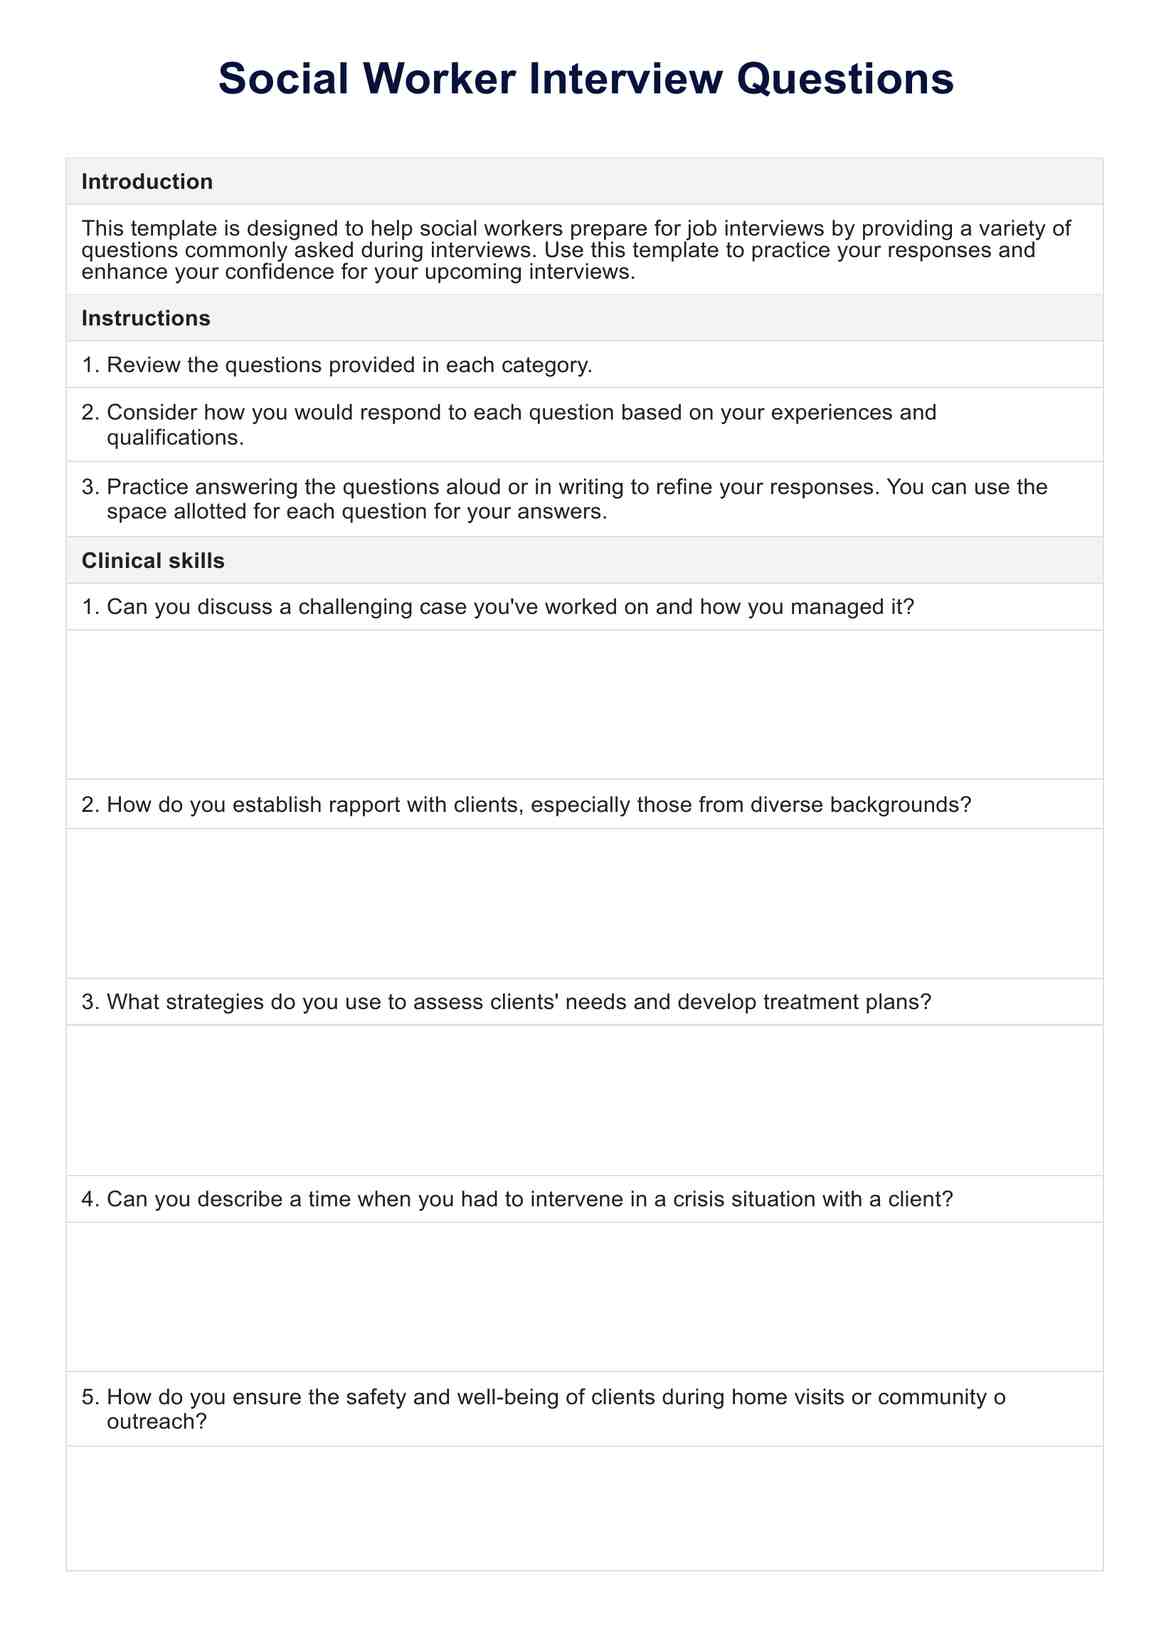 Social Worker Interview Questions PDF Example